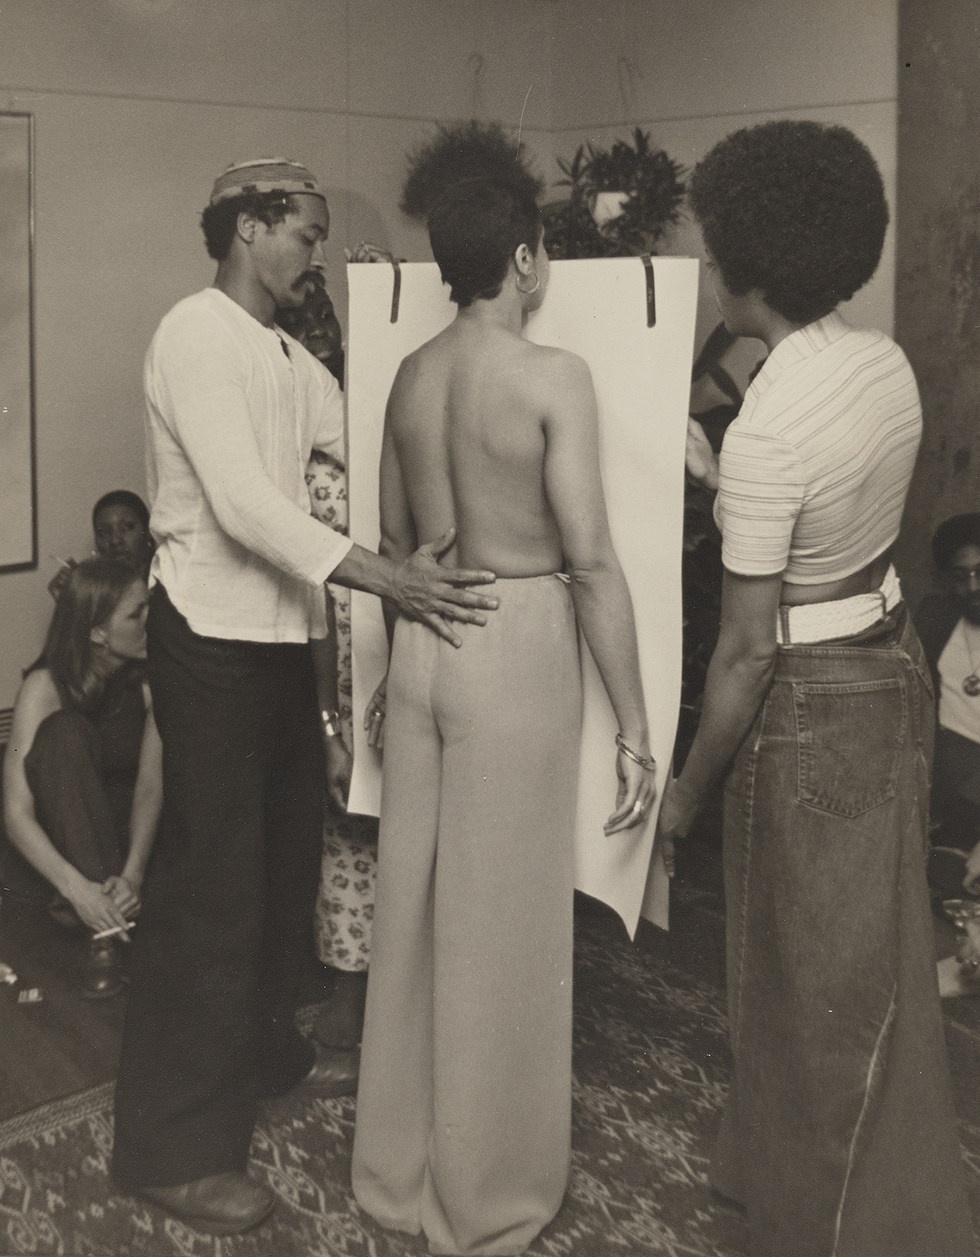 david hammons left and suzette wright center at the body print in held in conjunction with hammons’s exhibition greasy bags and barbeque bones, philip yenawine’s home, 1975 photograph by jeff morgan courtesy david hammons collection linda goode bryant, new york